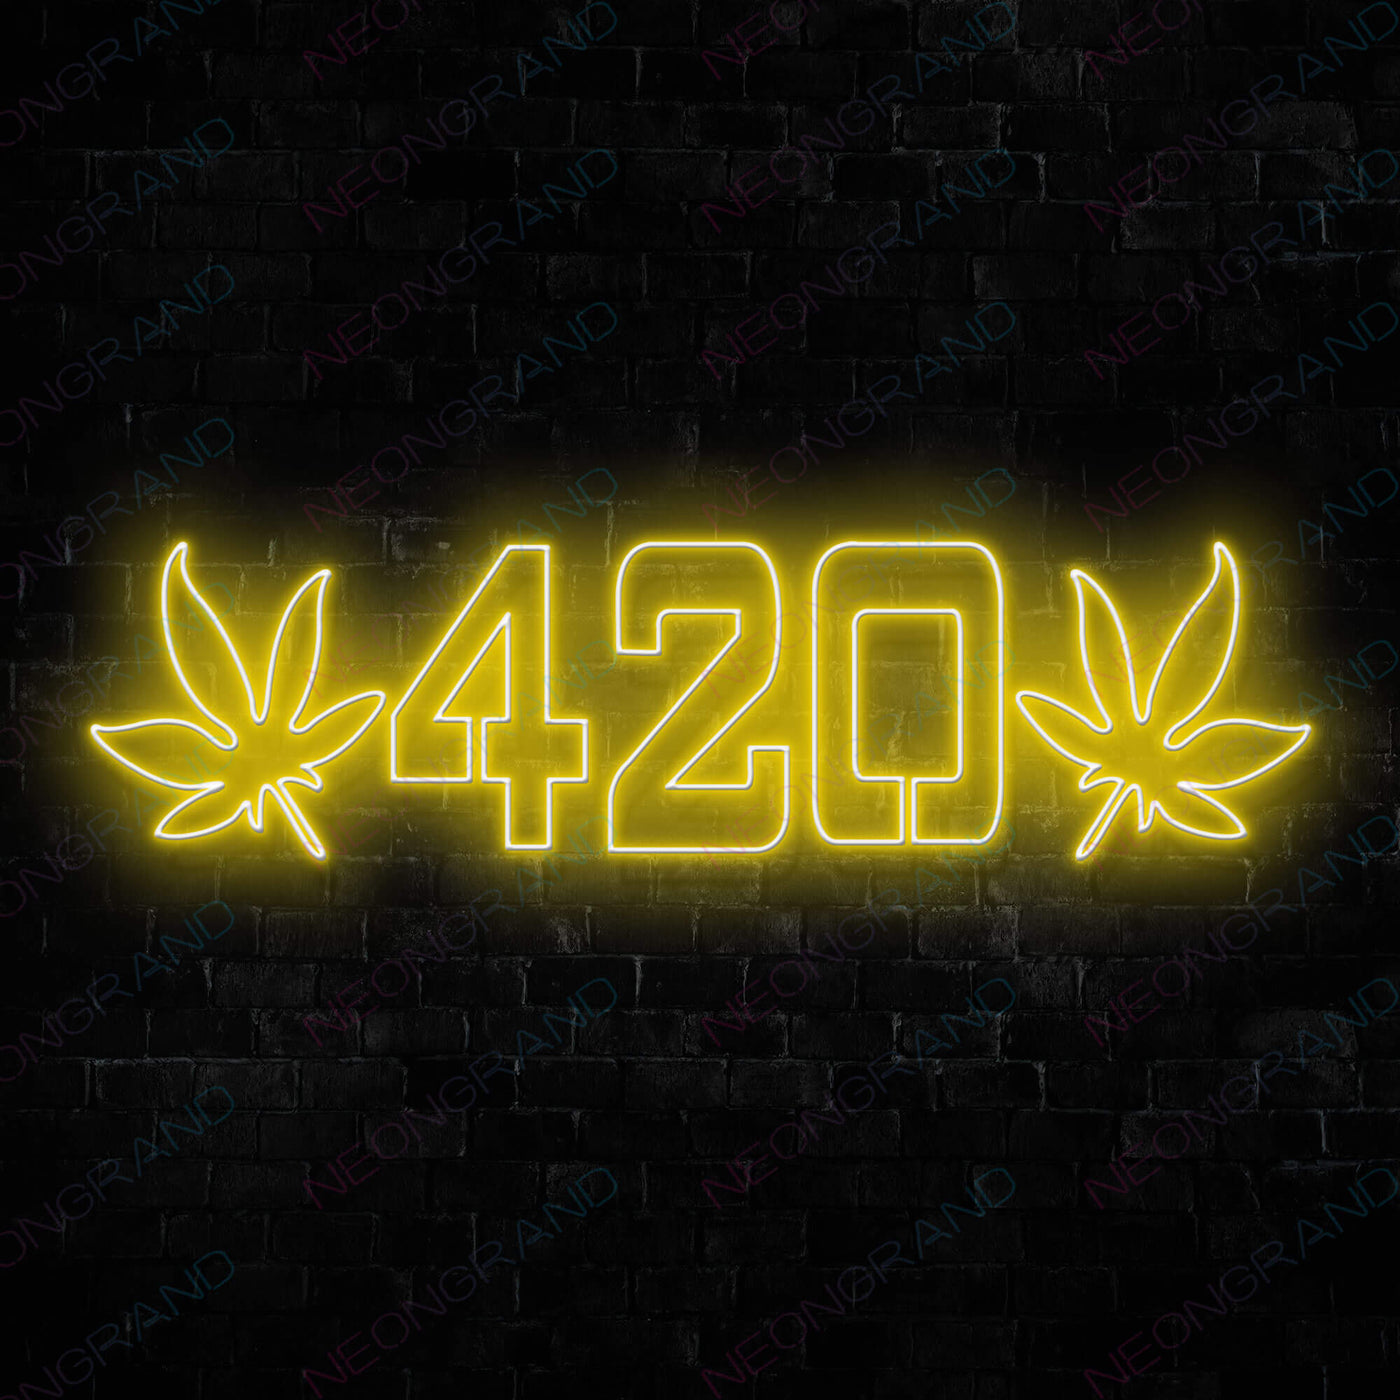 Cannabis 420 Weed Neon Sign Led Light yellow